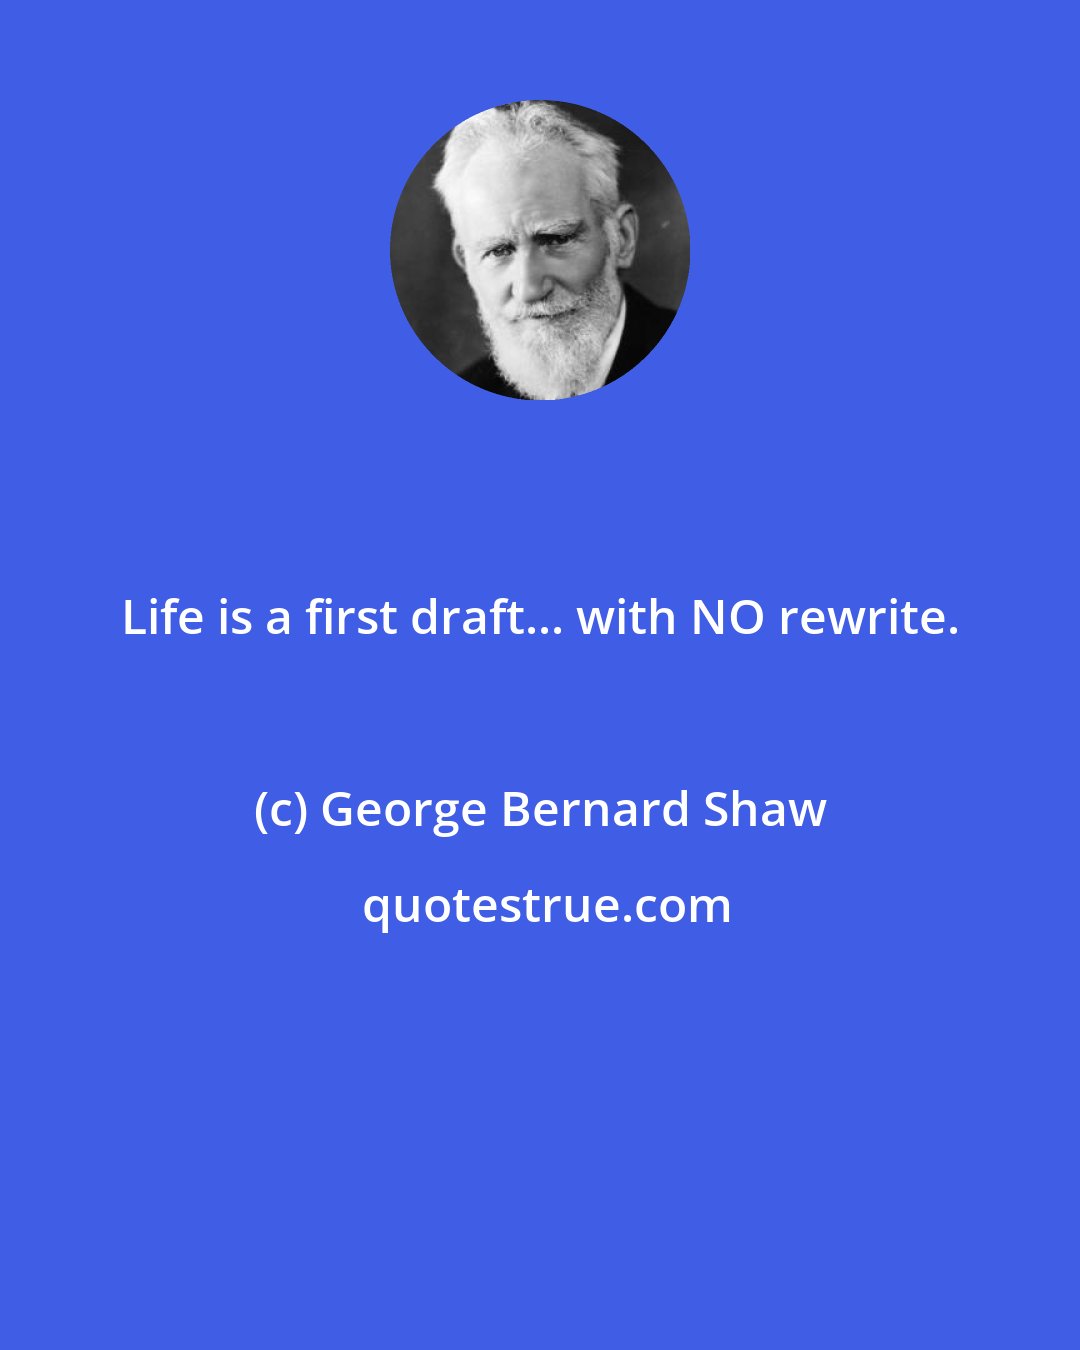 George Bernard Shaw: Life is a first draft... with NO rewrite.